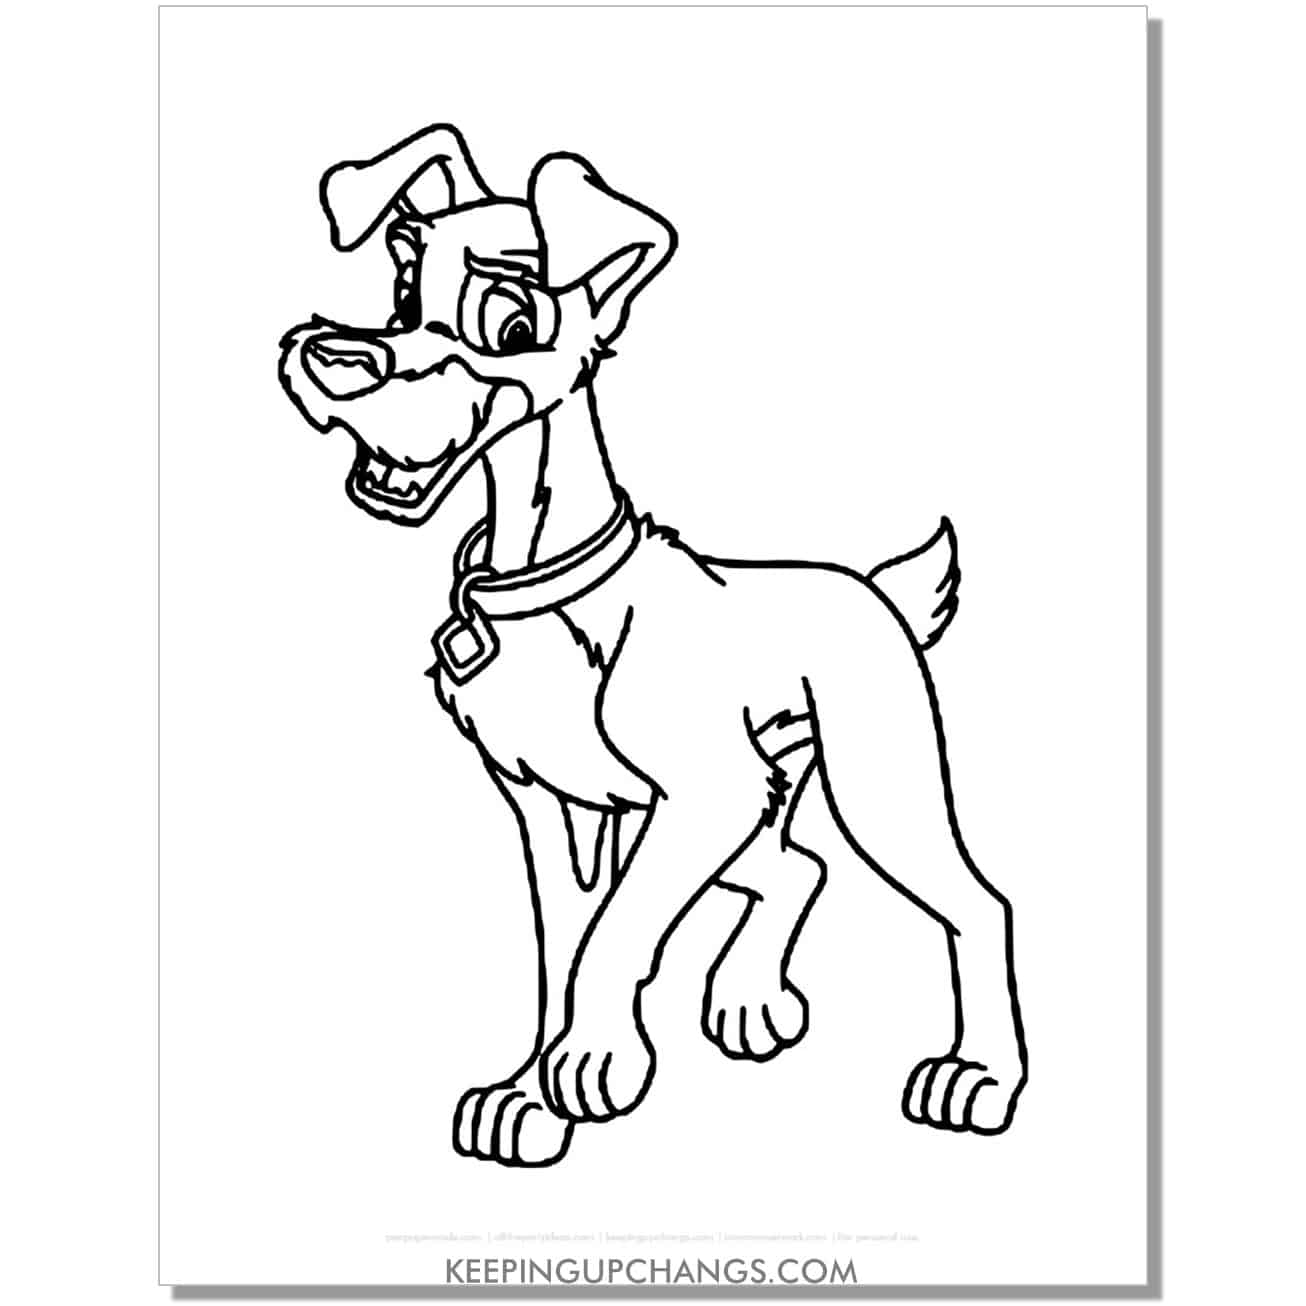 free tramp standing from lady and the tramp coloring page, sheet.